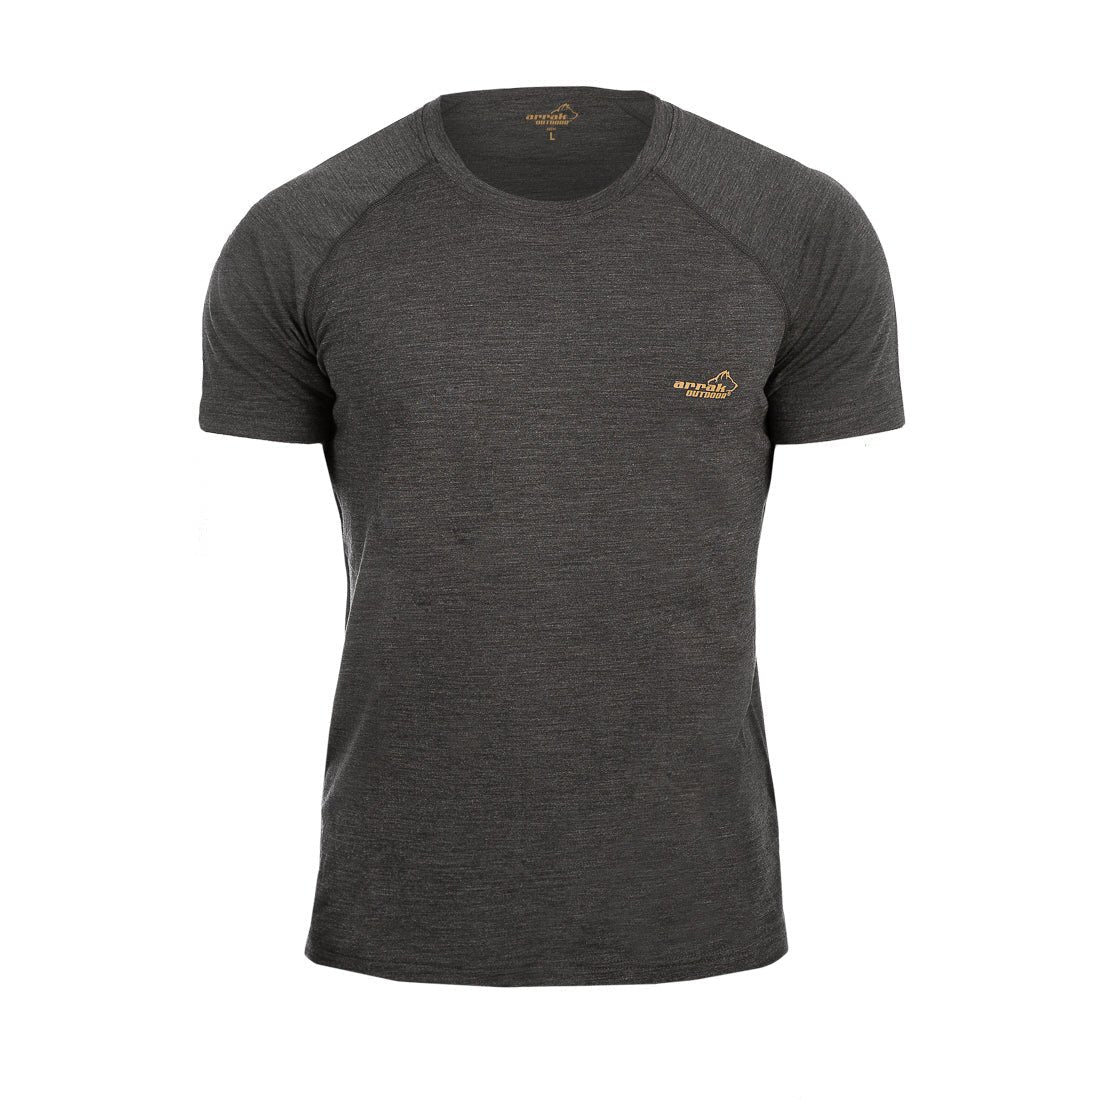 Stay Cool and Dry with the Short Sleeve Moisture-Wicking Merino